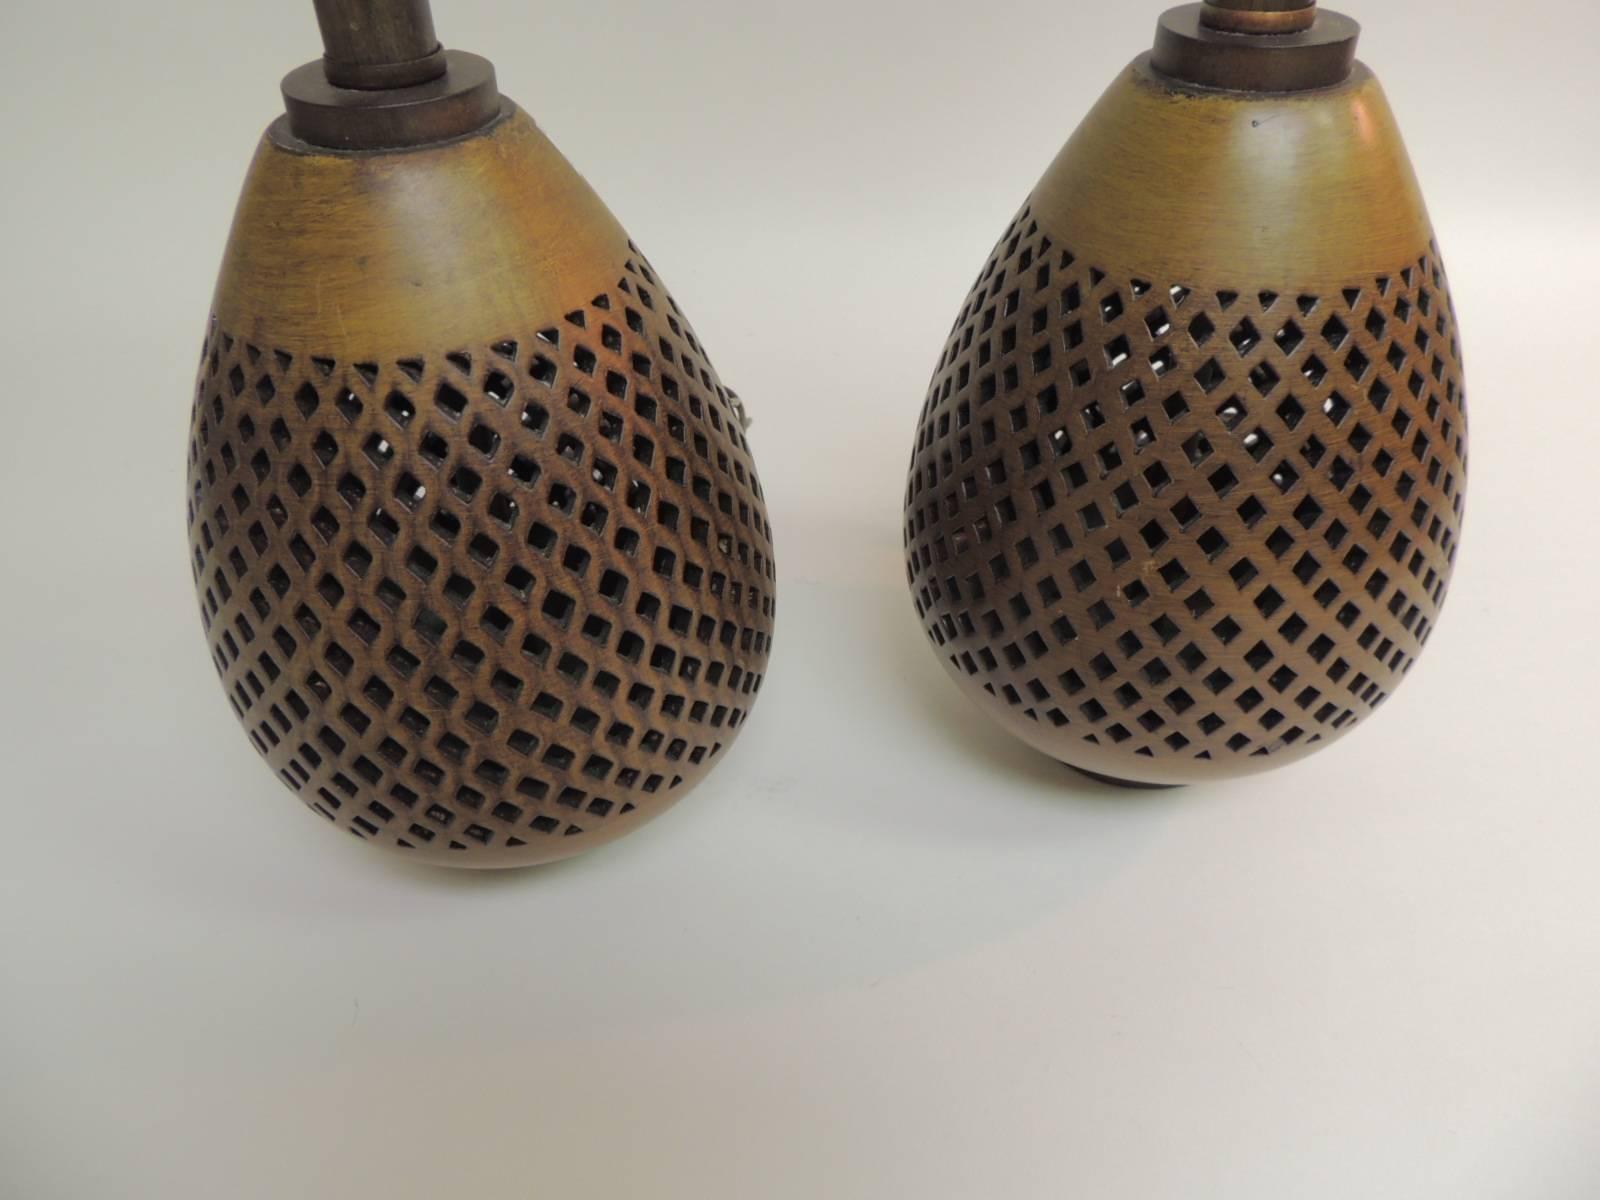 American Pair of Vintage Round Mid-Century Modern Brass Lamps with Piercing Details